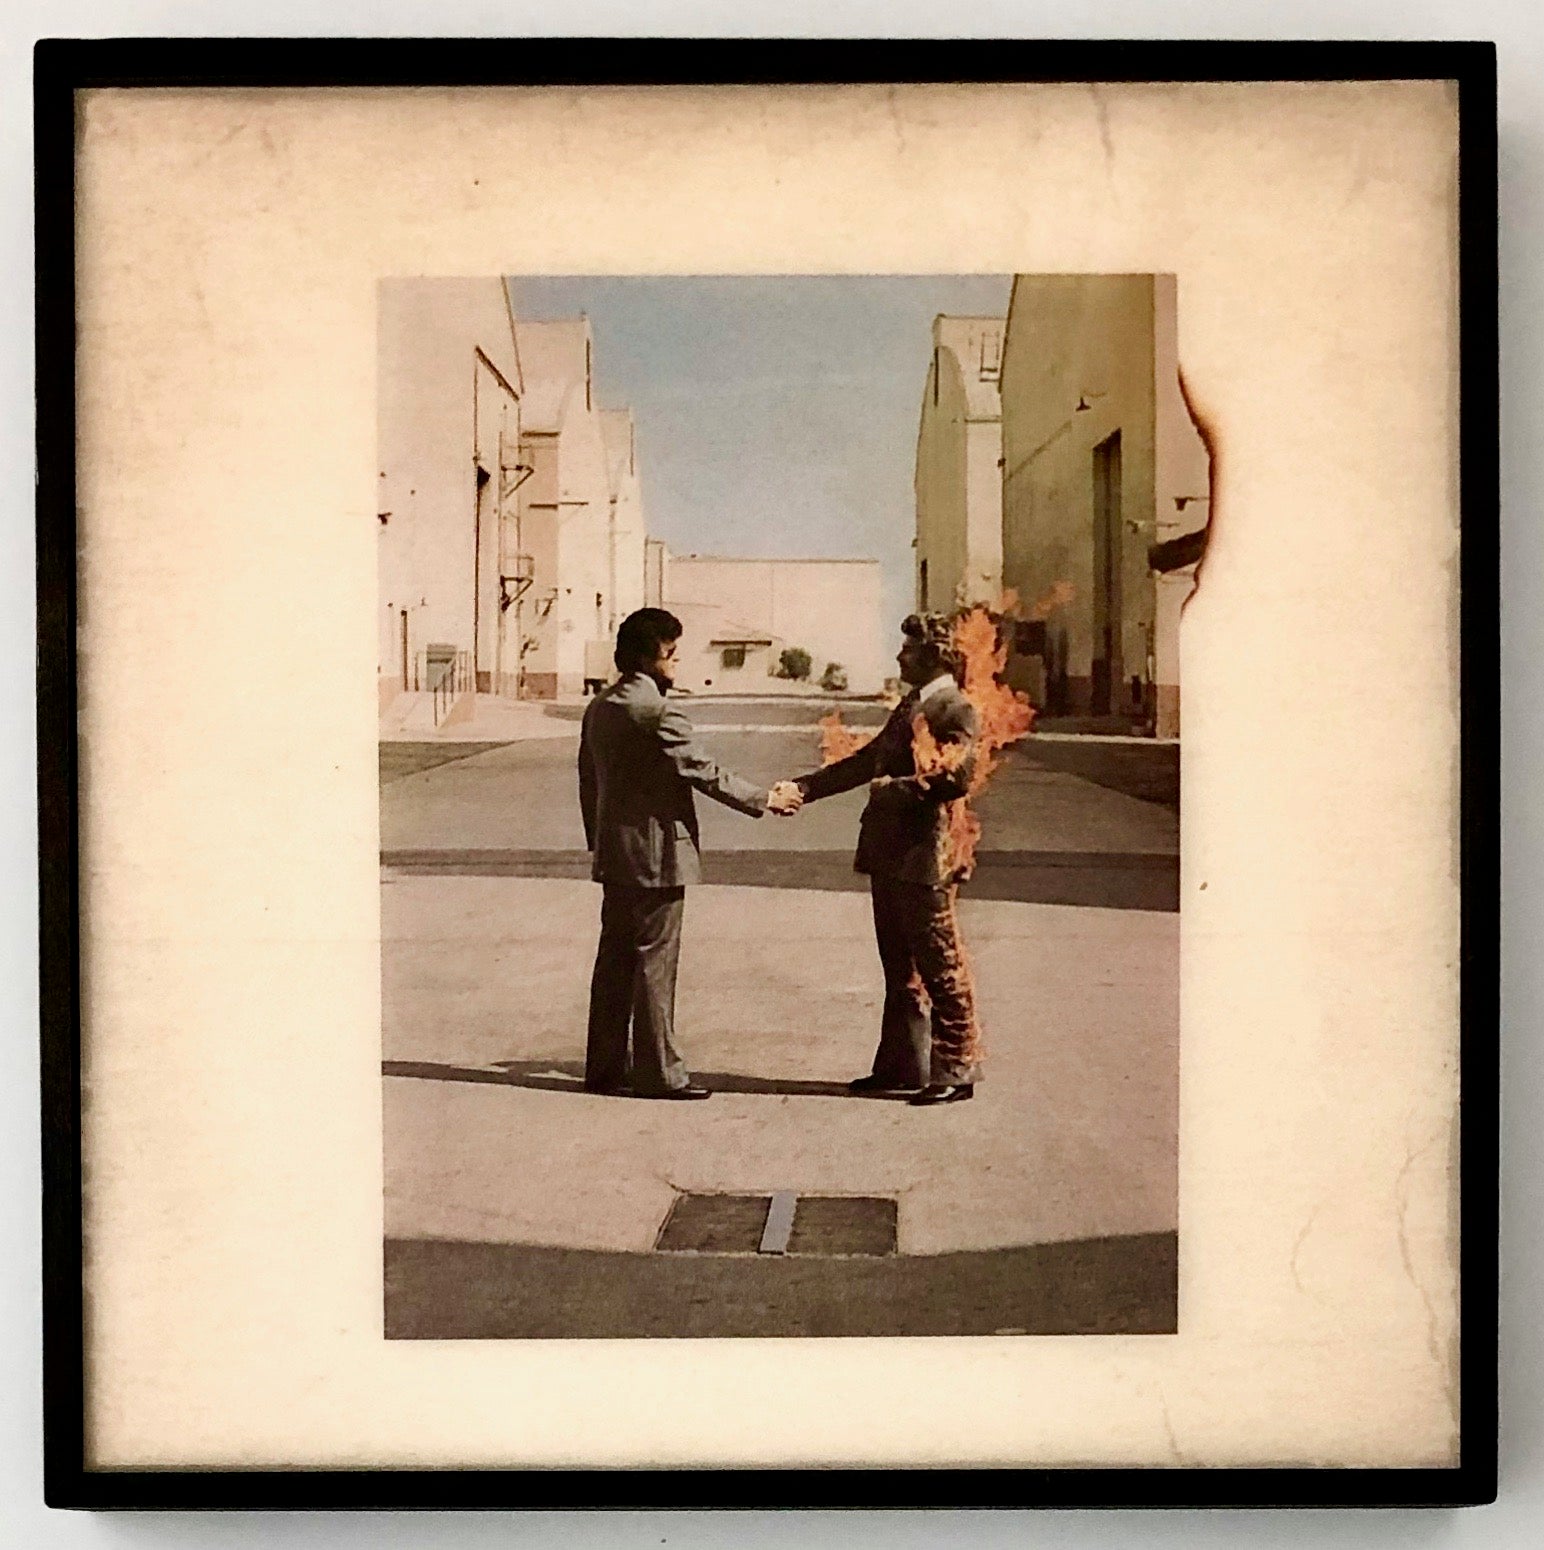 PINK FLOYD - Wish You Were Here